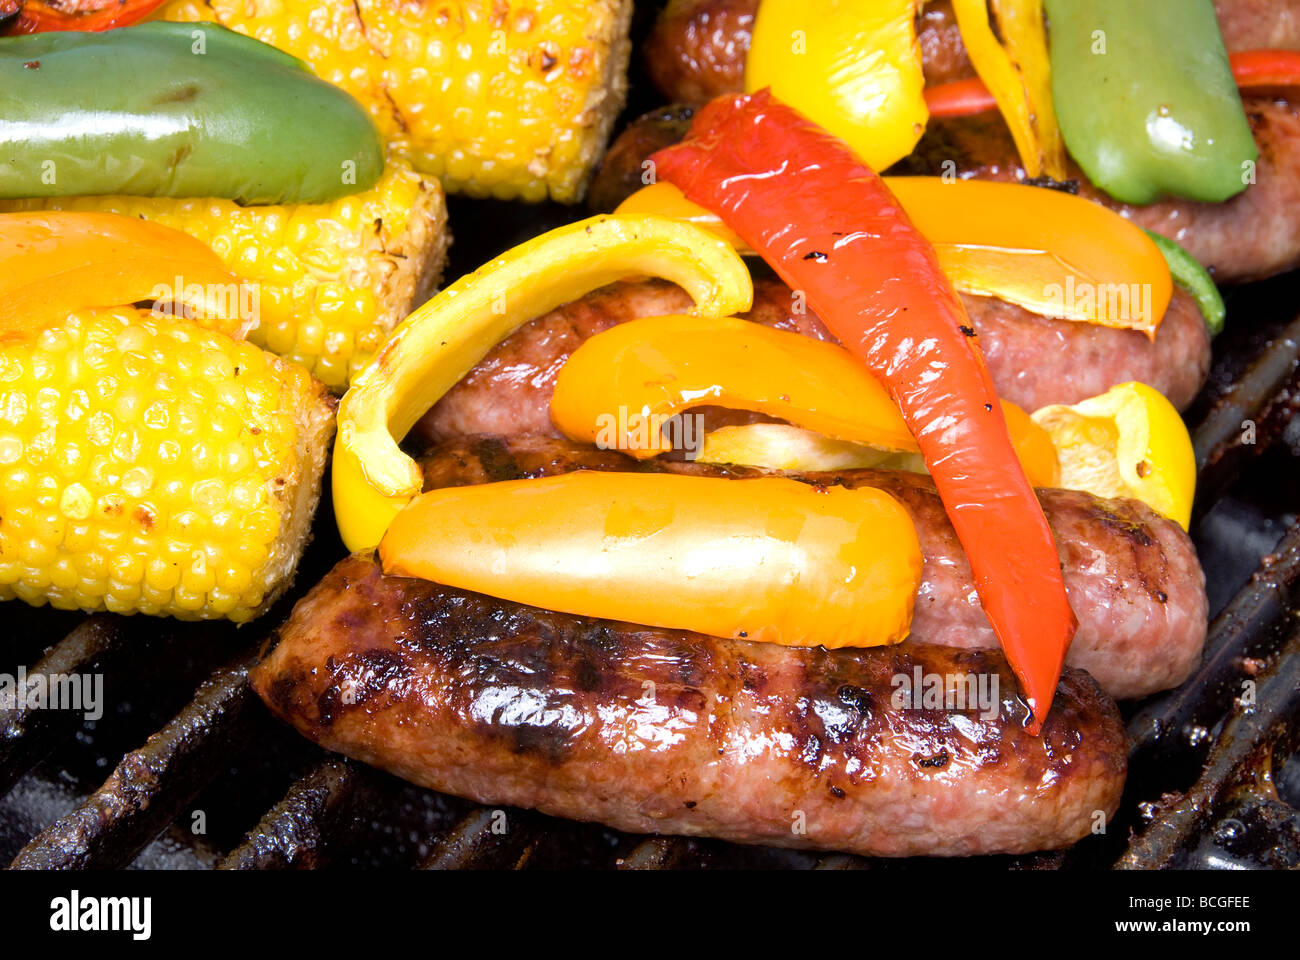 Beer bratwurst being grilled with bell peppers along with corn on the cob Stock Photo